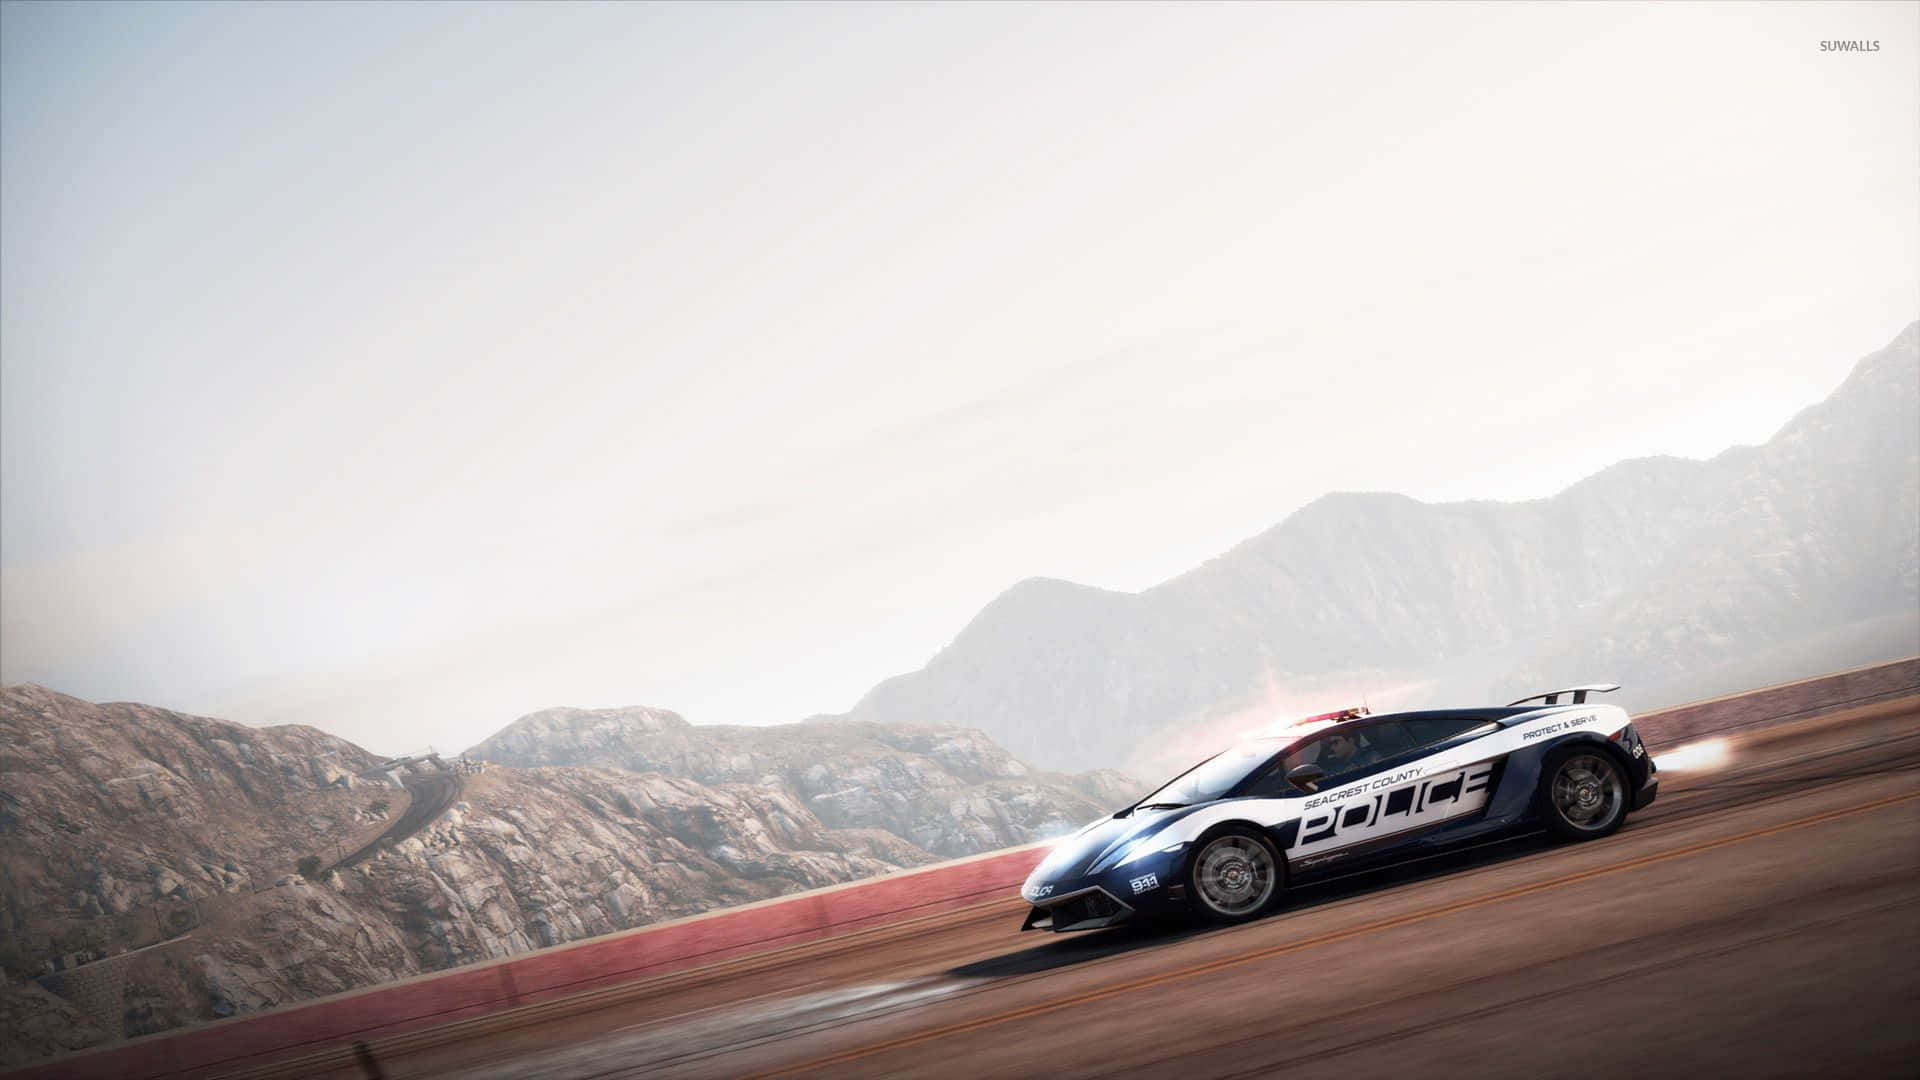 A Police Car Driving On A Track With Mountains In The Background